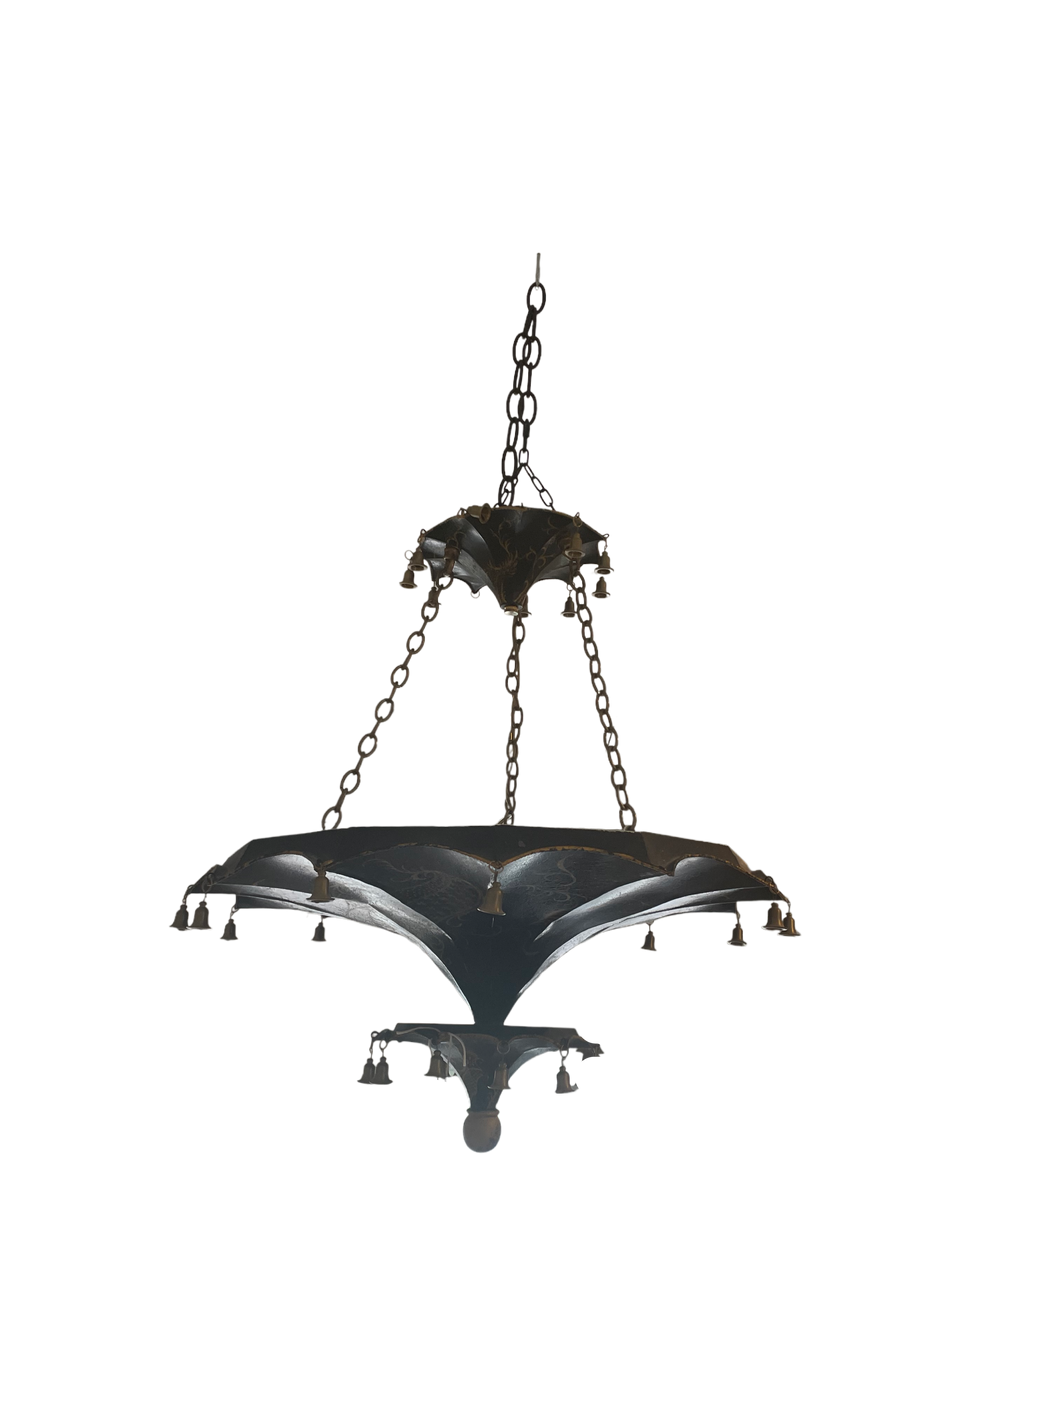 Chinese Two-Tier Chinoiserie Inverted Umbrella-Pagoda Chandelier